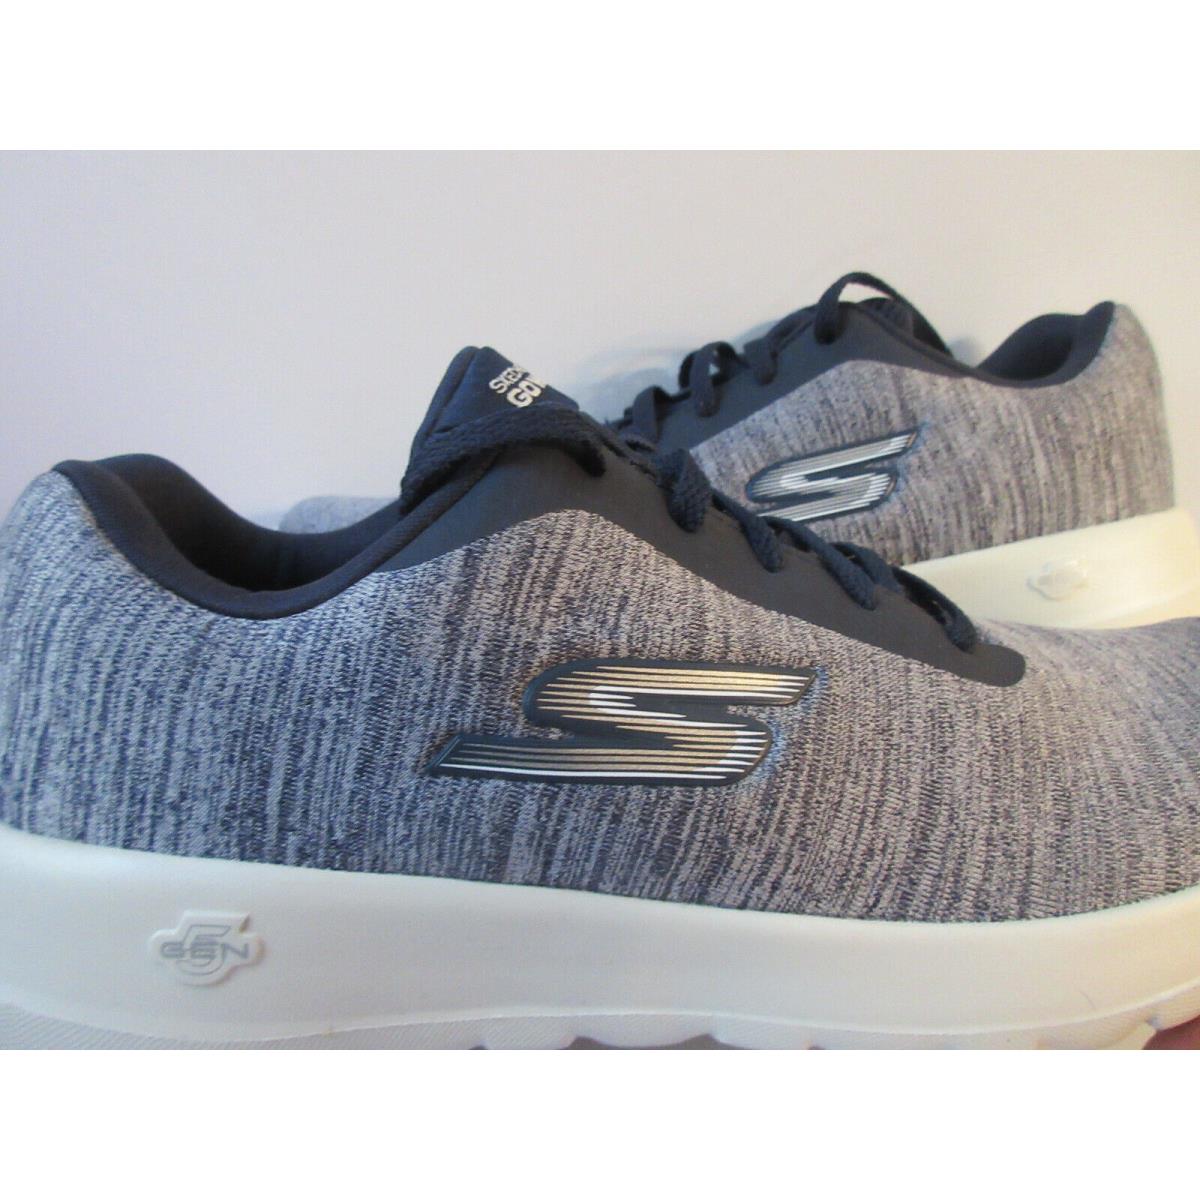 Skechers shoes Air Cooled GoGA Mat - Gray 6